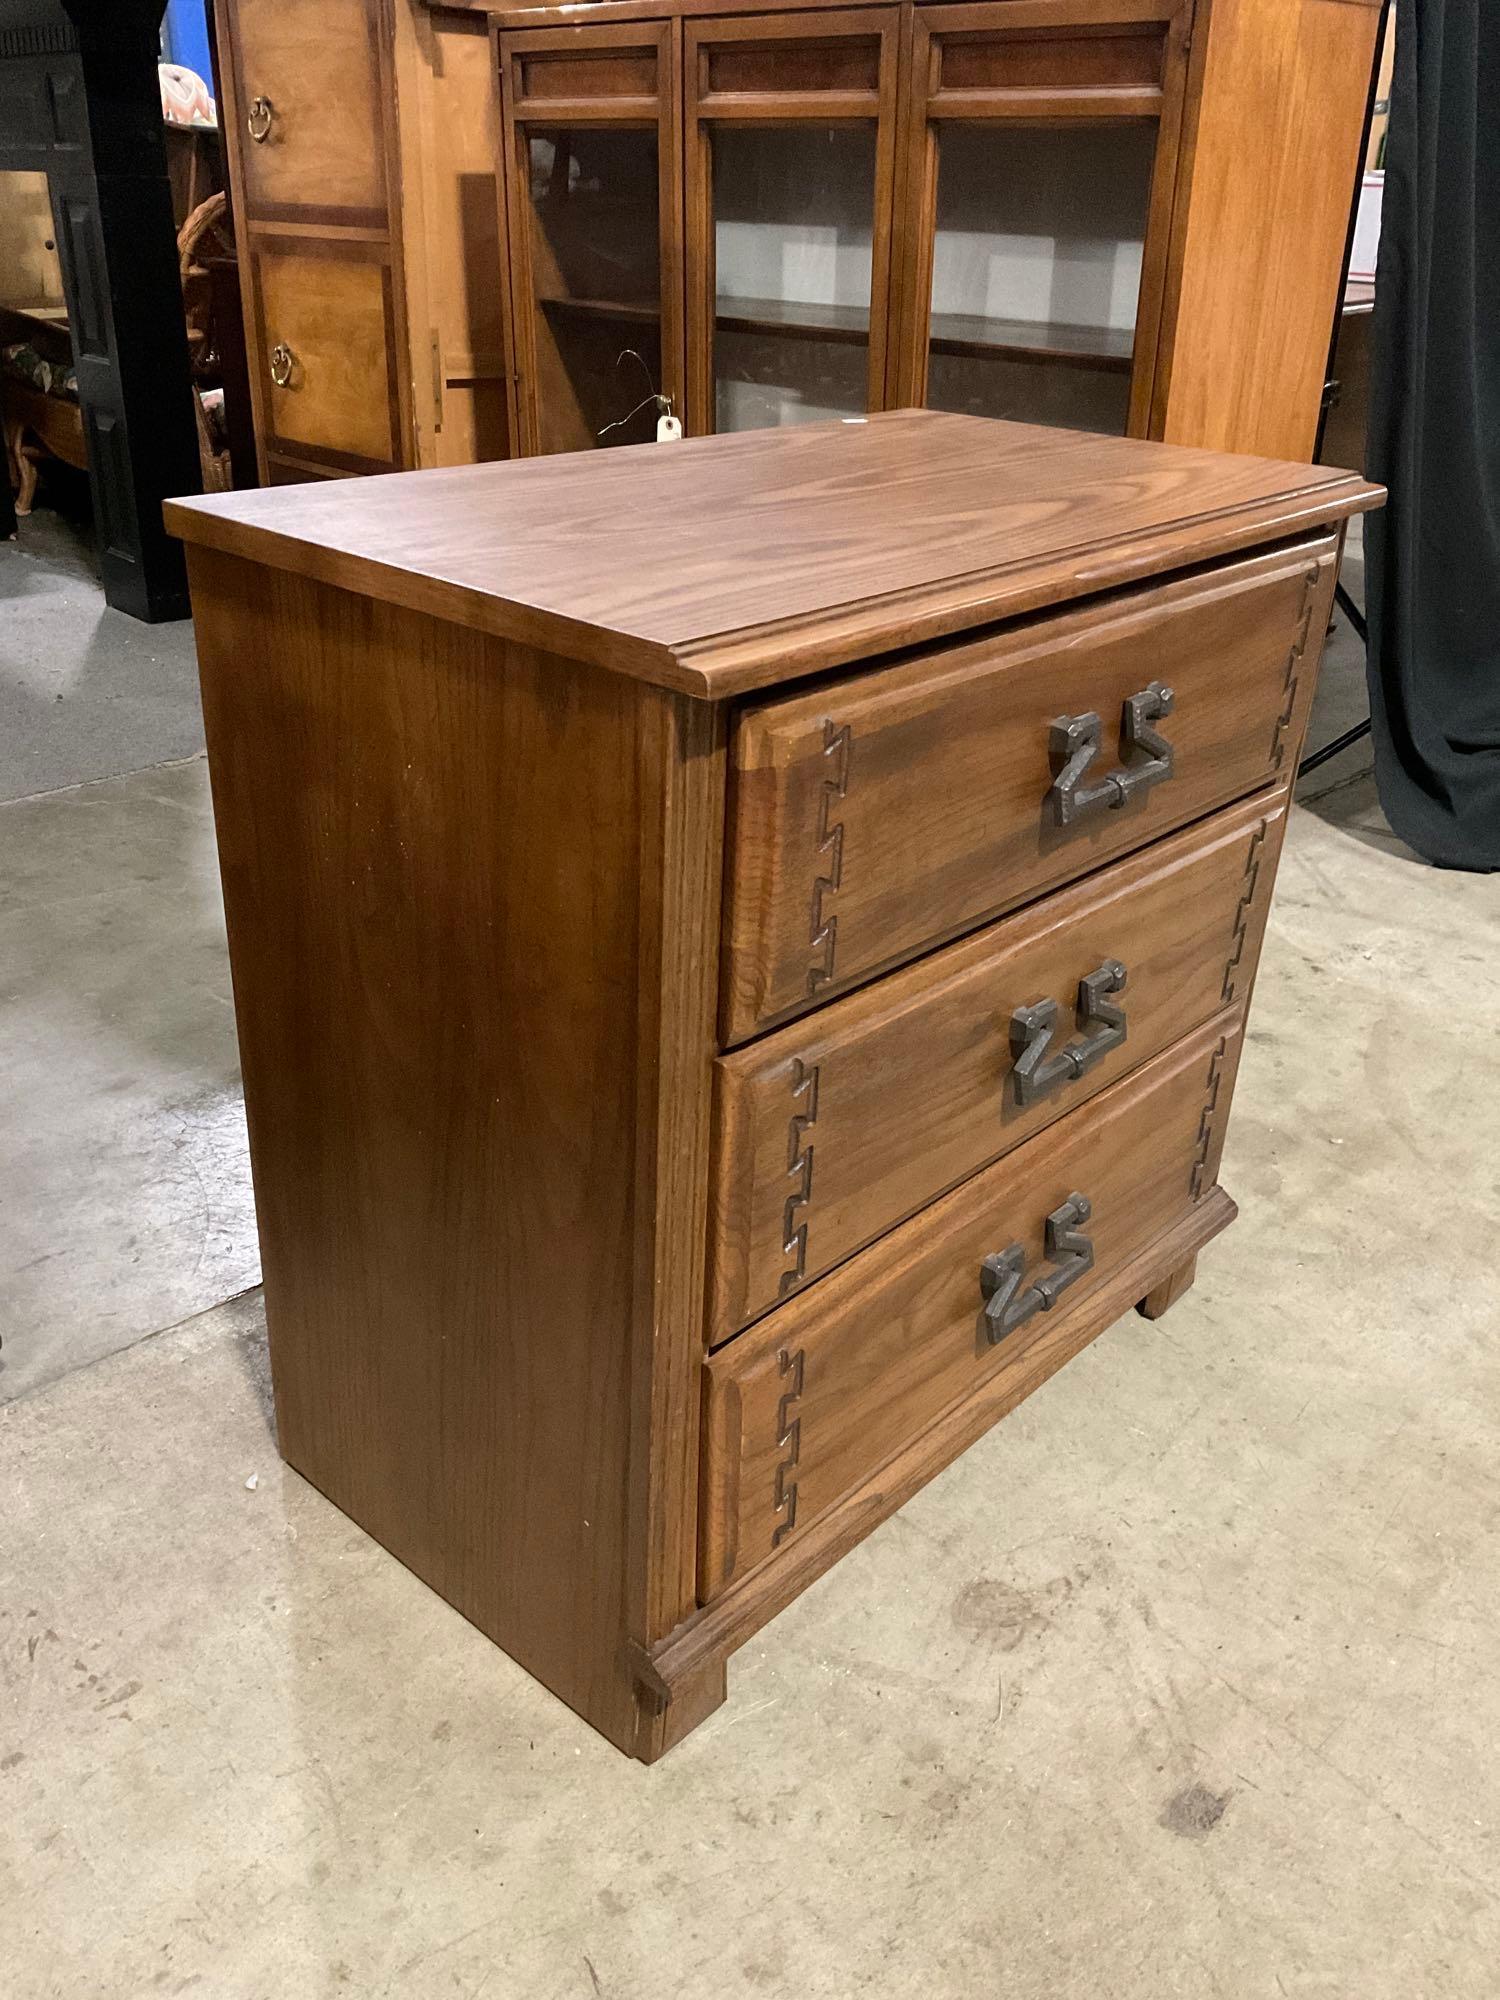 Vintage Wooden Nightstand w/ 3 Drawers & Hammered Drawer Pulls. See pics.